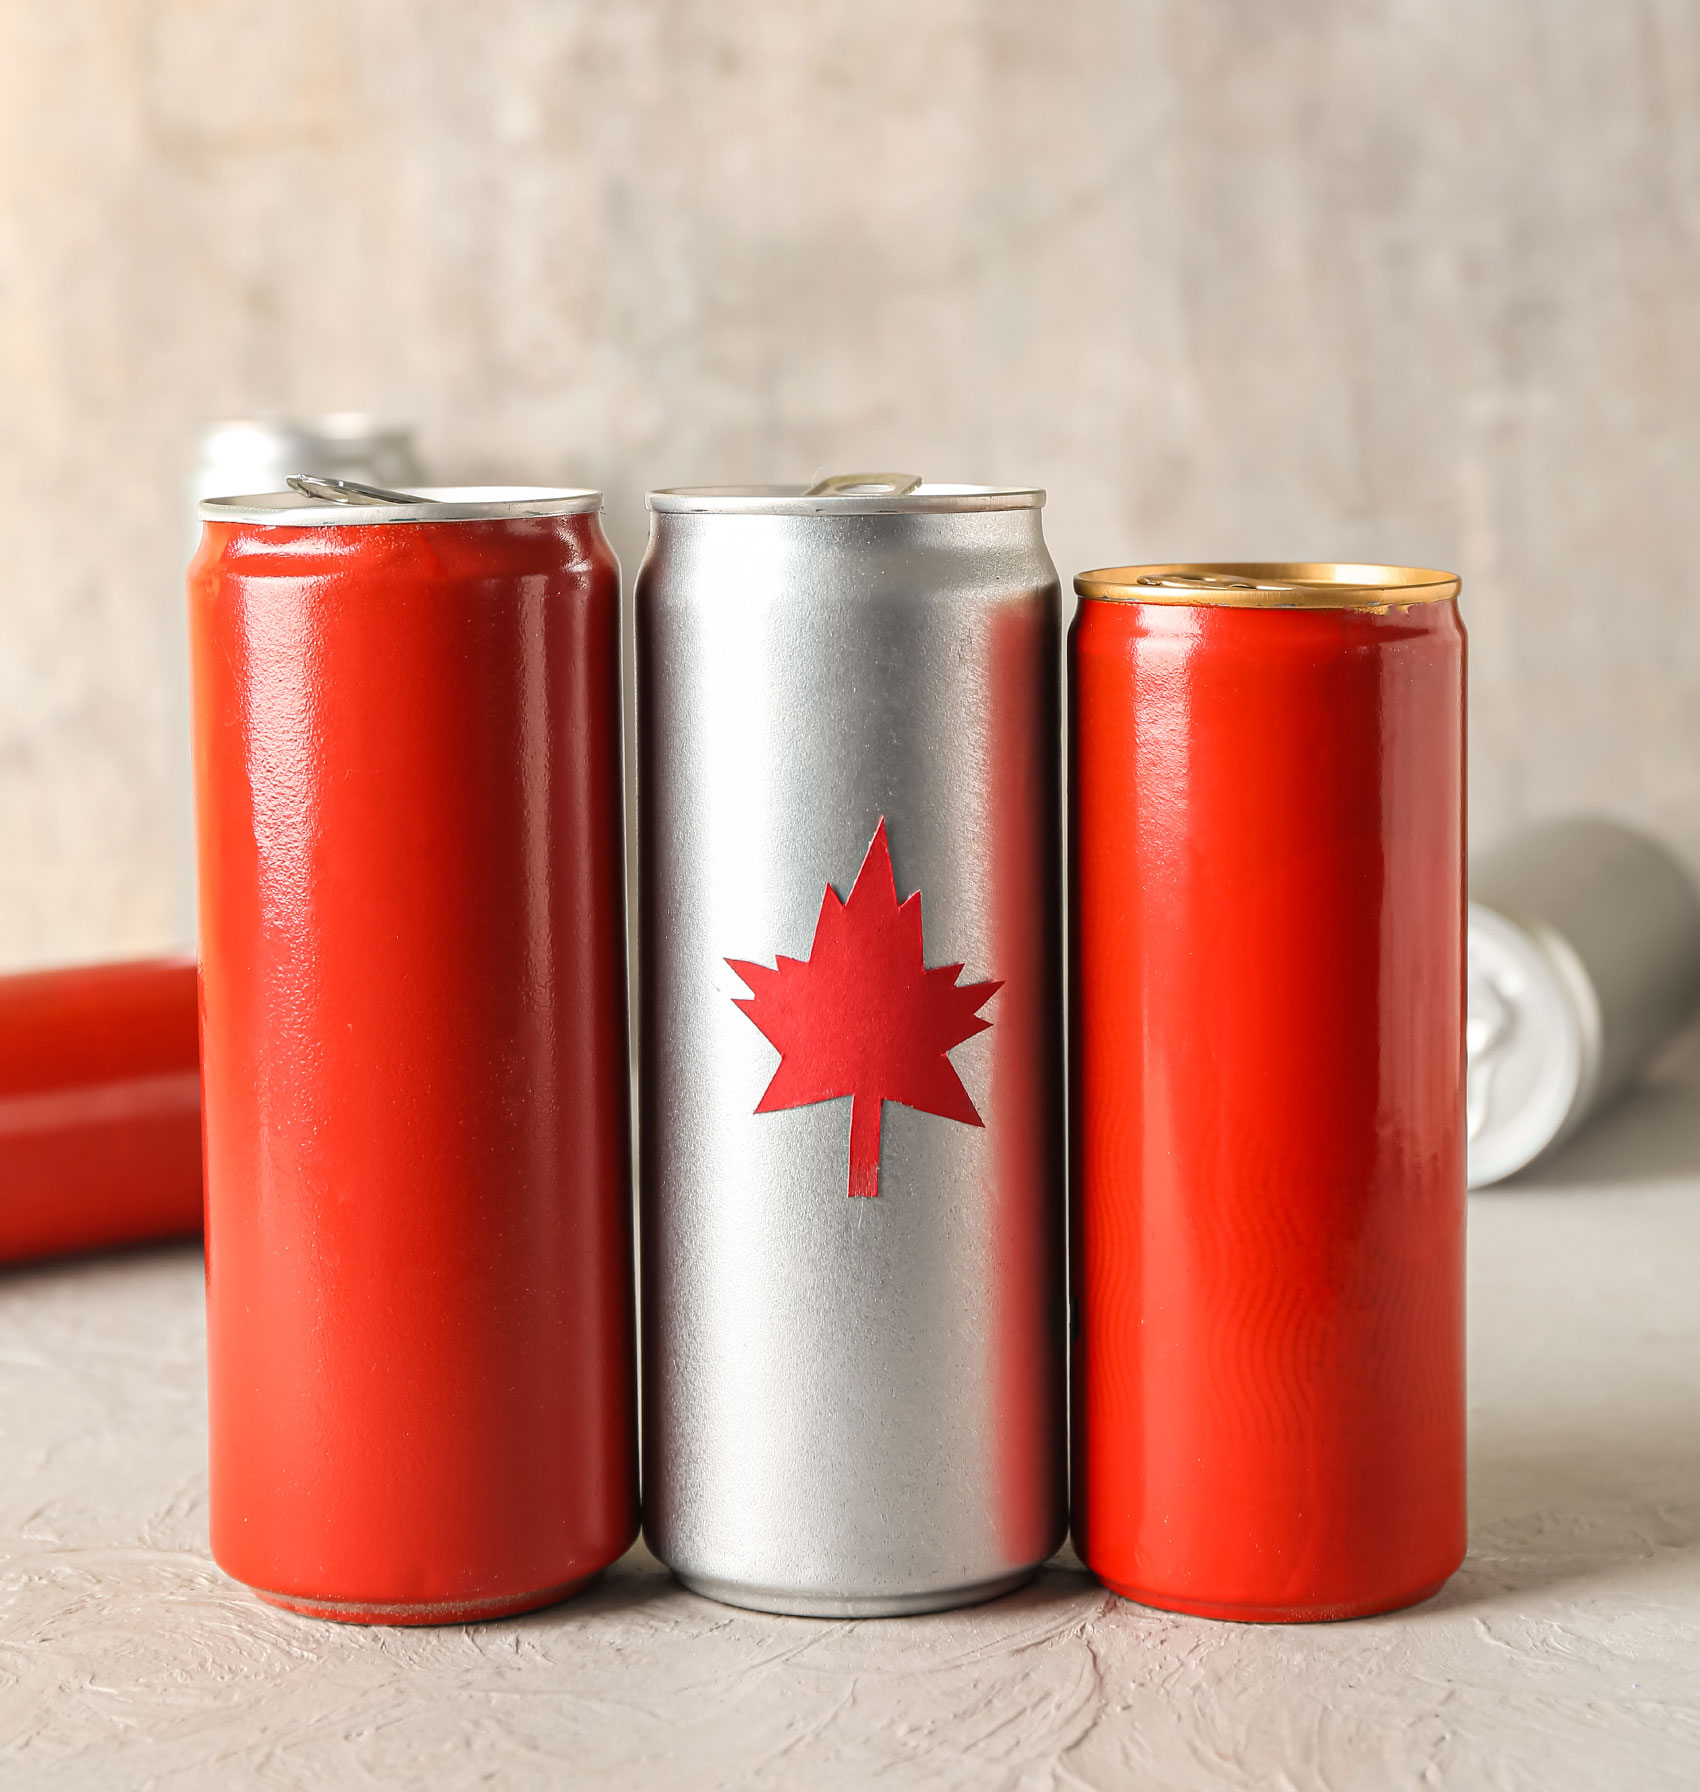 2 red cans and one silver one with a red maple leaf affixed to it